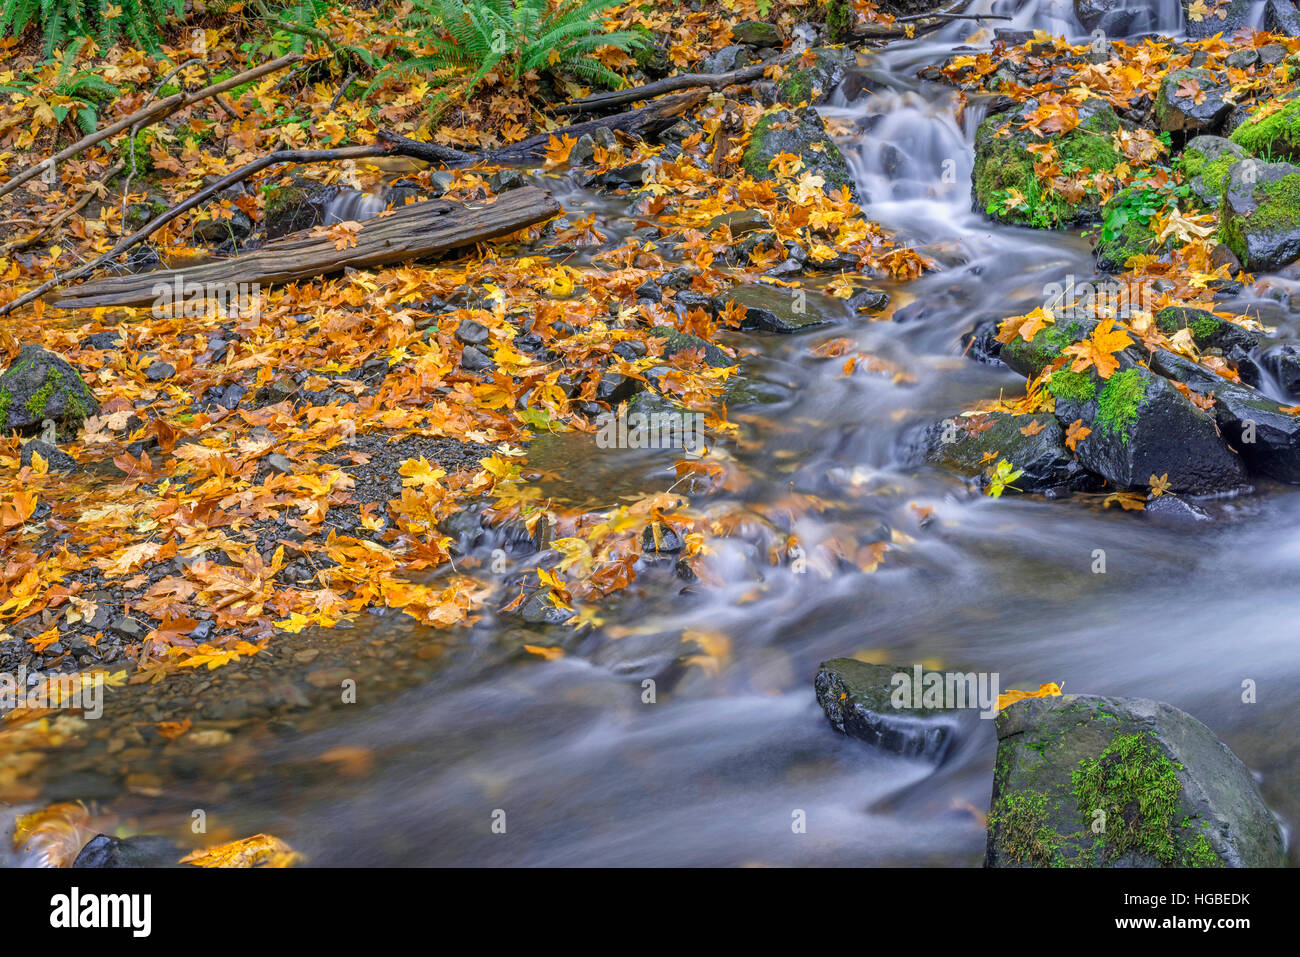 USA, Oregon, Columbia River Gorge National Scenic Area, Starvation Creek in autumn with fallen maple leaves, rocks and moss. Stock Photo